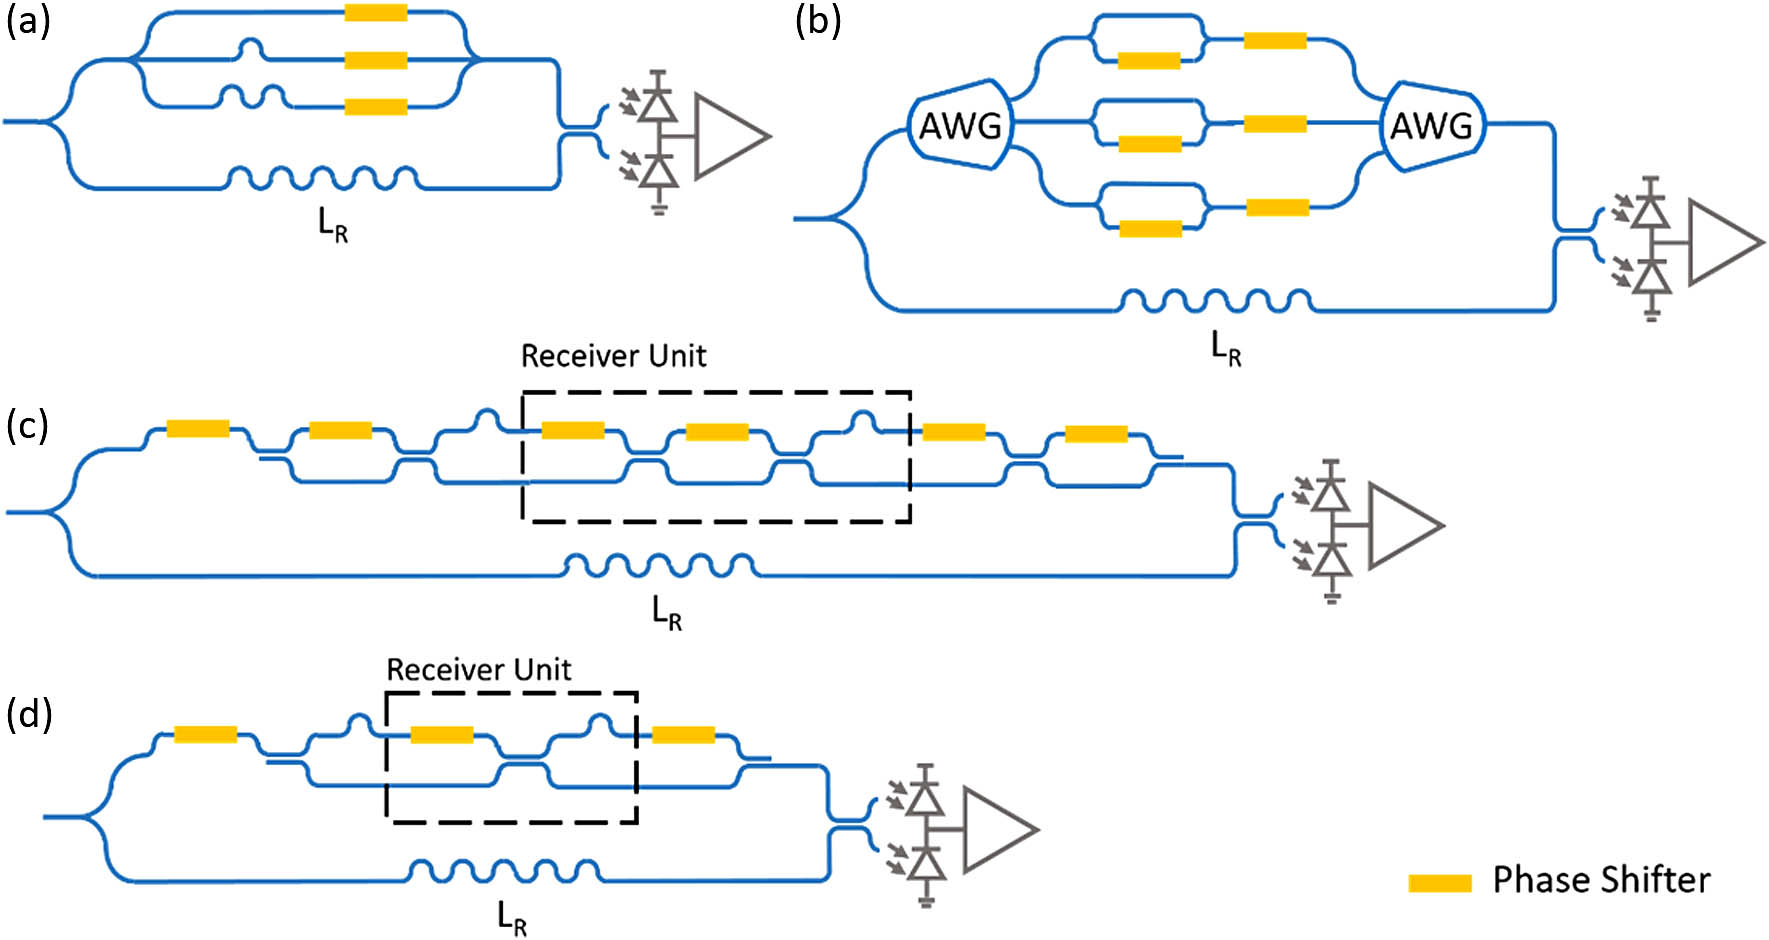 Signal weighting schemes. In (a), phases can be set independently in the top demodulator branch at the expense of reducing the amplitude proportionally to the number of paths. In (b), this is alleviated by introducing arrayed waveguide gratings to (de-)multiplex the comb lines, allowing, in principle, lossless signal recombination. However, AWGs require a substantial chip area. Significant reduction of the demodulator size is achieved by simultaneously allowing the pilot tone to cross each path in the upper demodulator branch of (c) so that a programmable superposition of all possible combinations of delays is obtained. (d) Further simplified network in which the embedded MZIs have been replaced by static splitters with an off-3-dB splitting ratio.